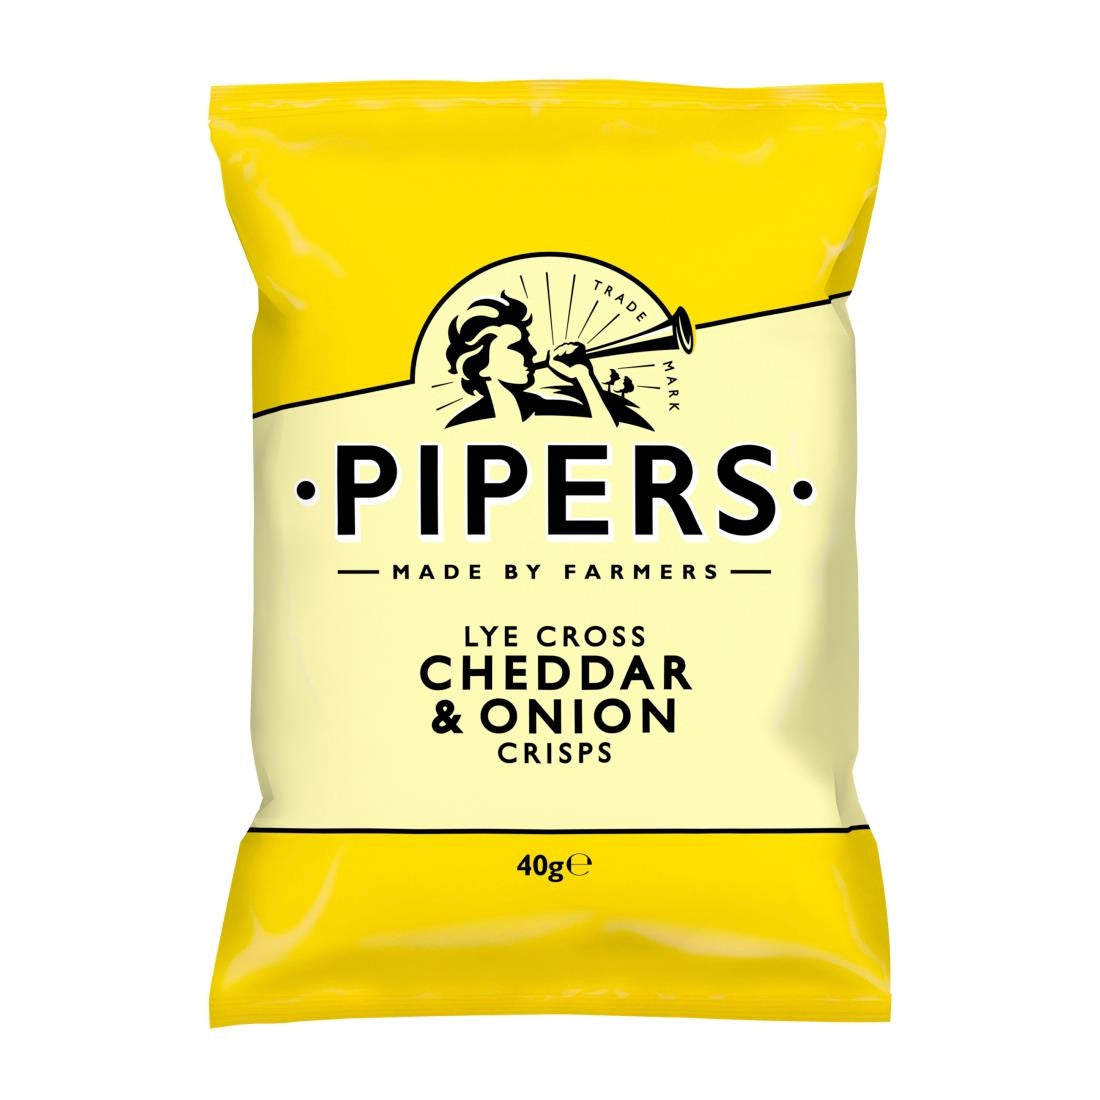 CZ701 Pipers Lye Cross Cheddar & Onion 40g (Pack of 24) JD Catering Equipment Solutions Ltd